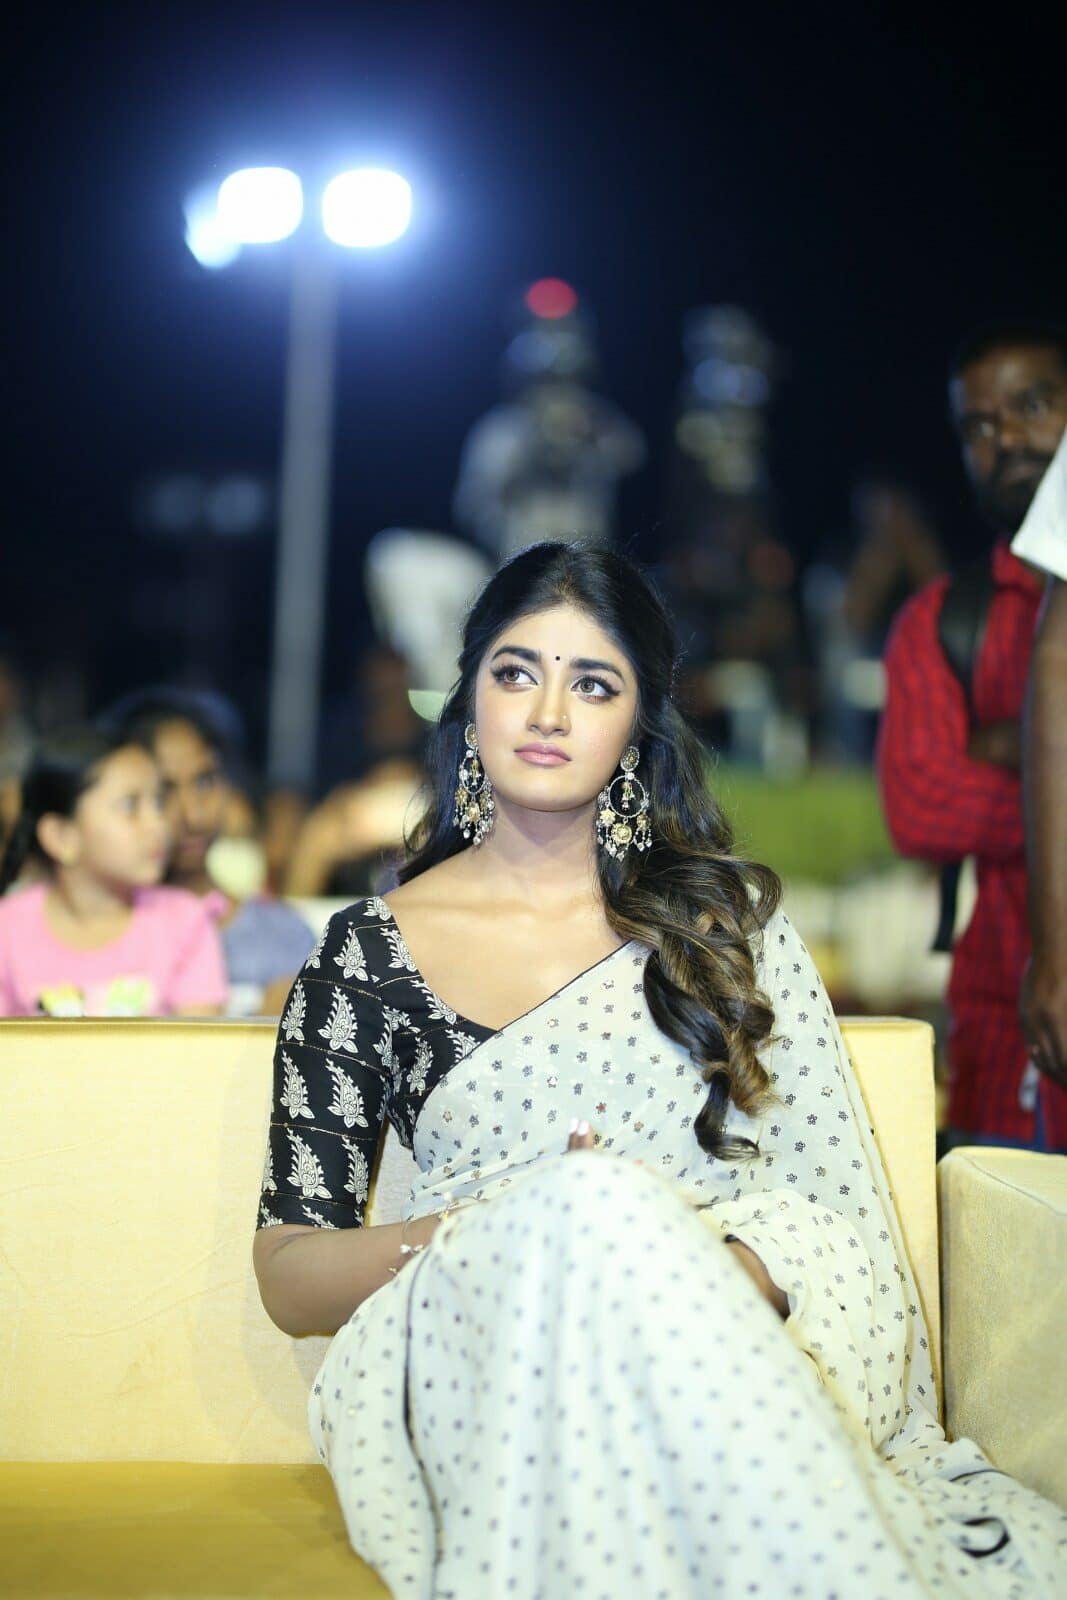 Dimple Hayathi is equally classy and hot in an off-white sari